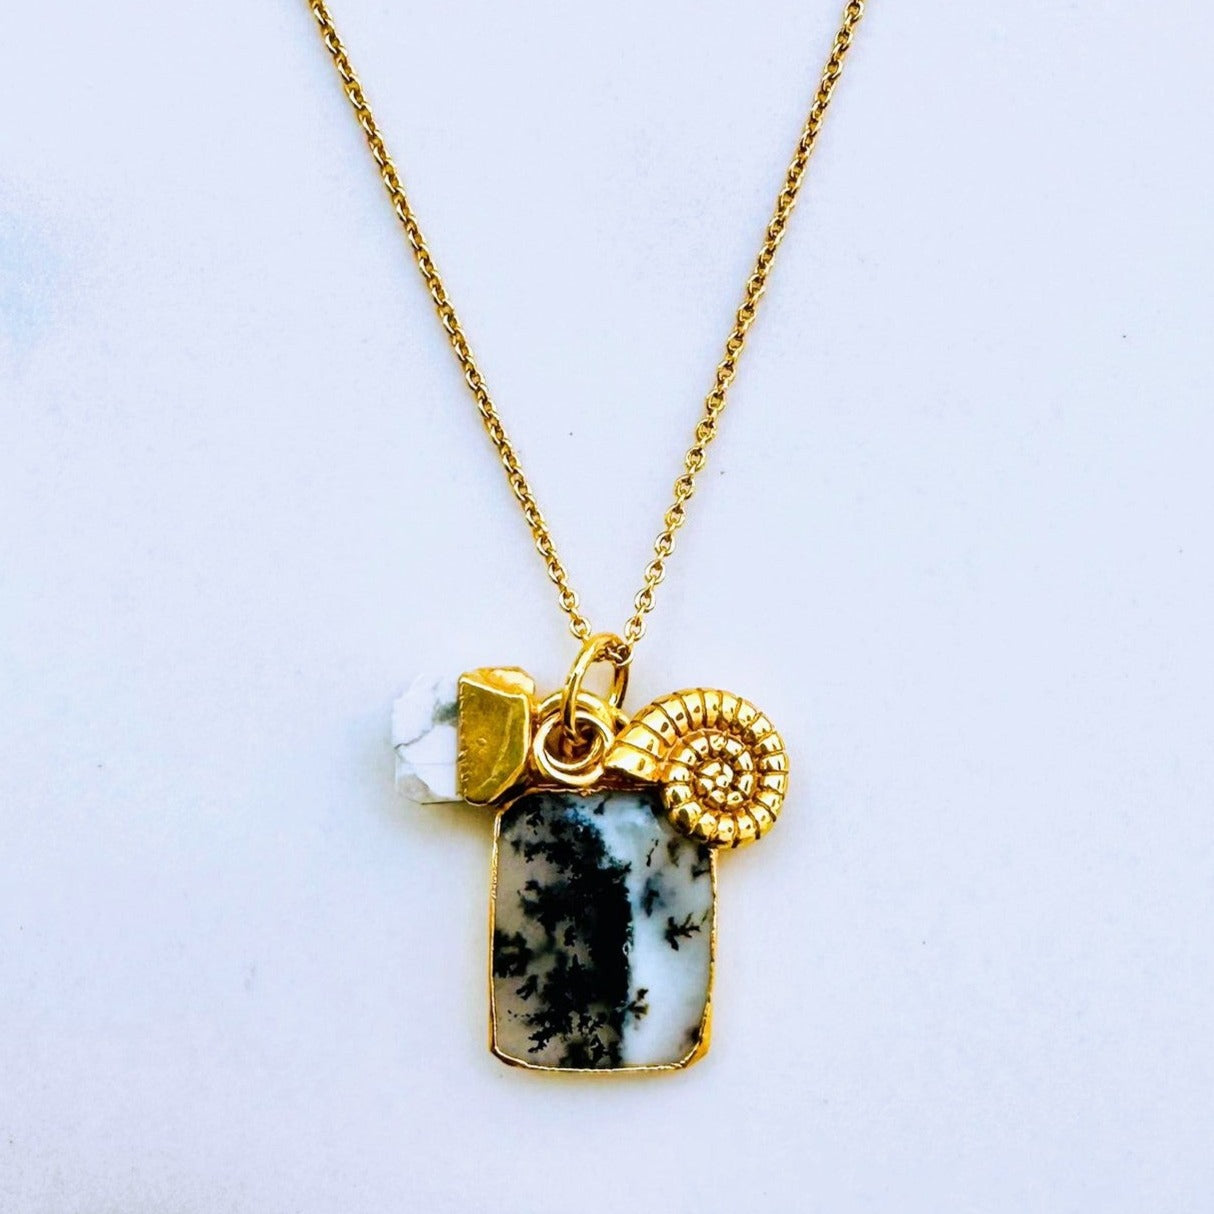 Gold plated dendritic agate, white howlite and ammonite charm pendant necklace